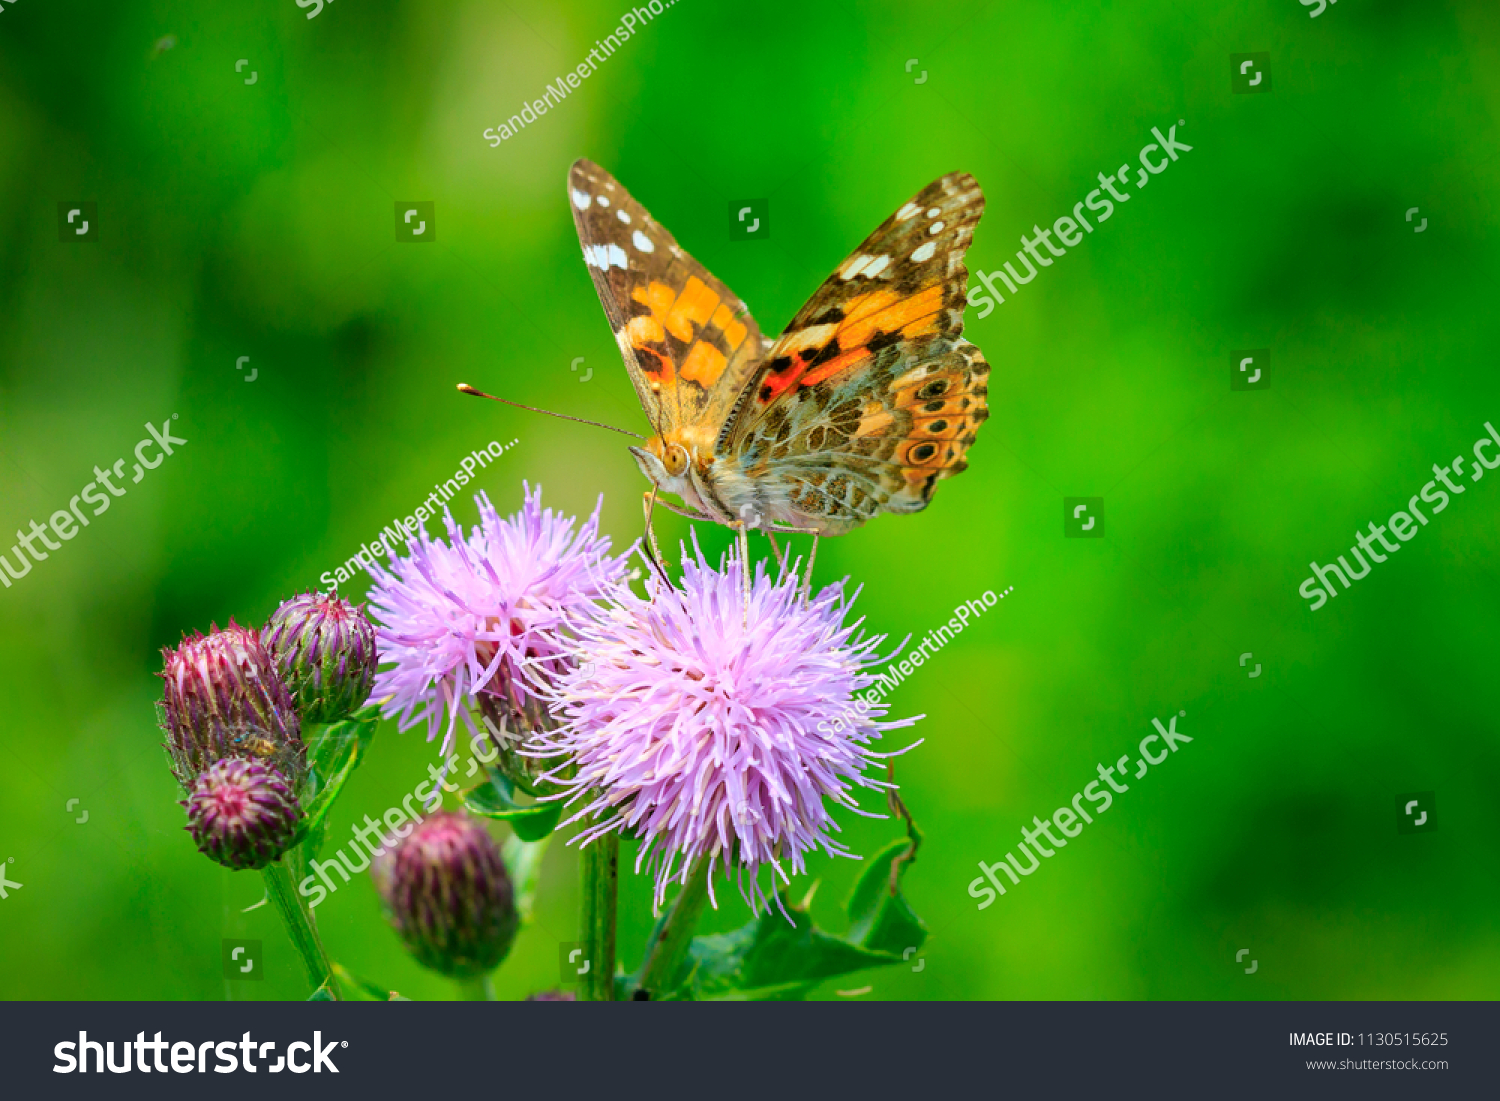 Painted Lady butterfly (vanessa cardu) feeding nectar from a purple thistle. #1130515625